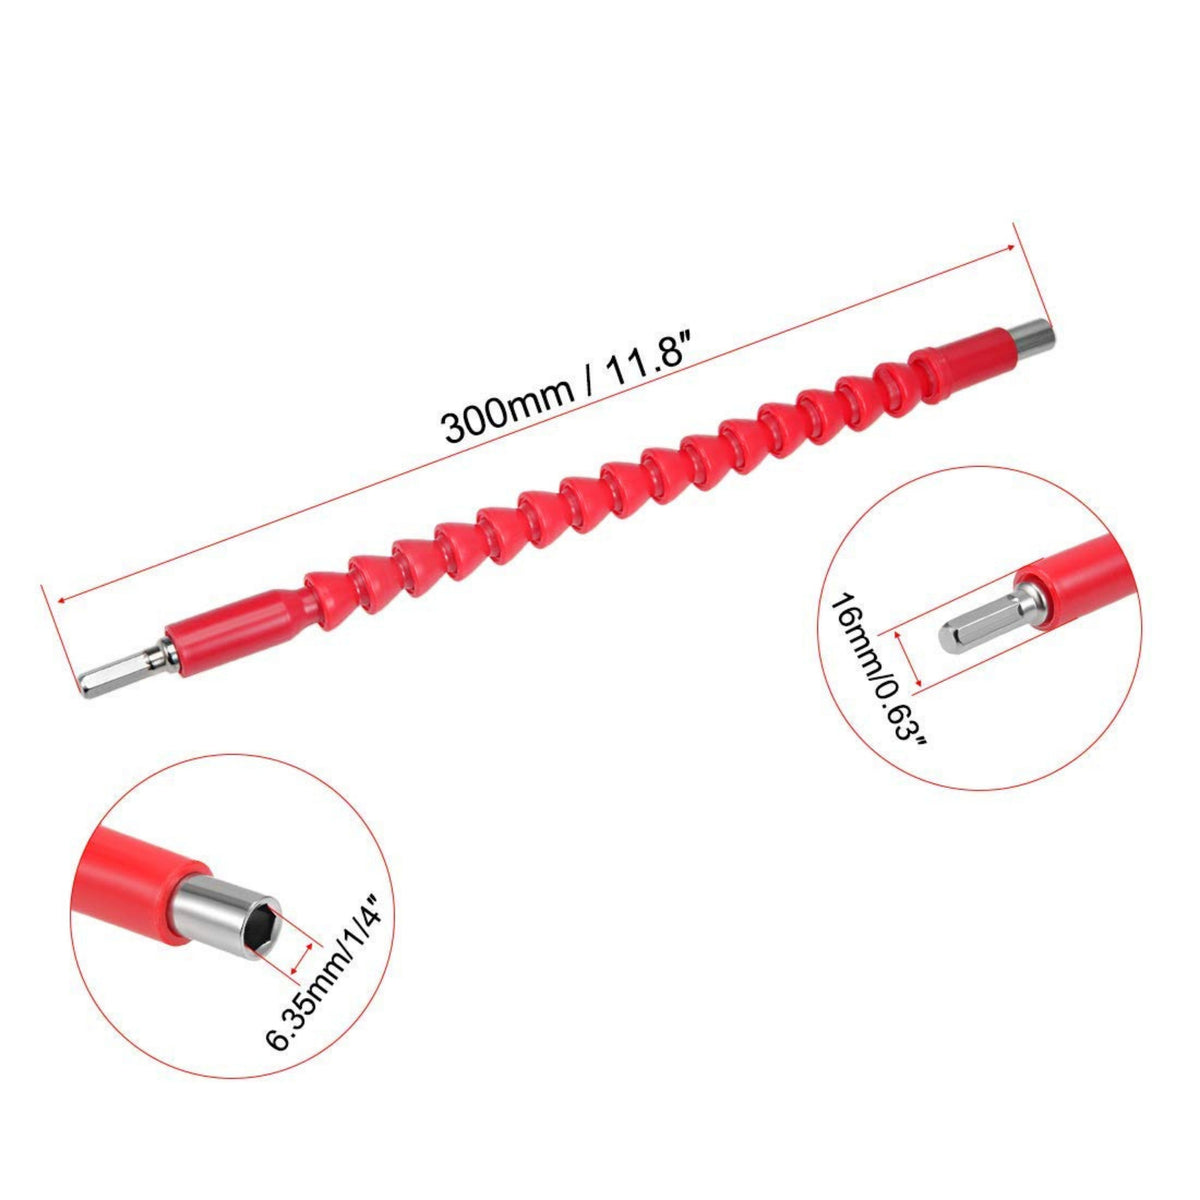 BUY Homdum Magnetic Drill Extension for Screwdriver Flexible¼6mmx300mm